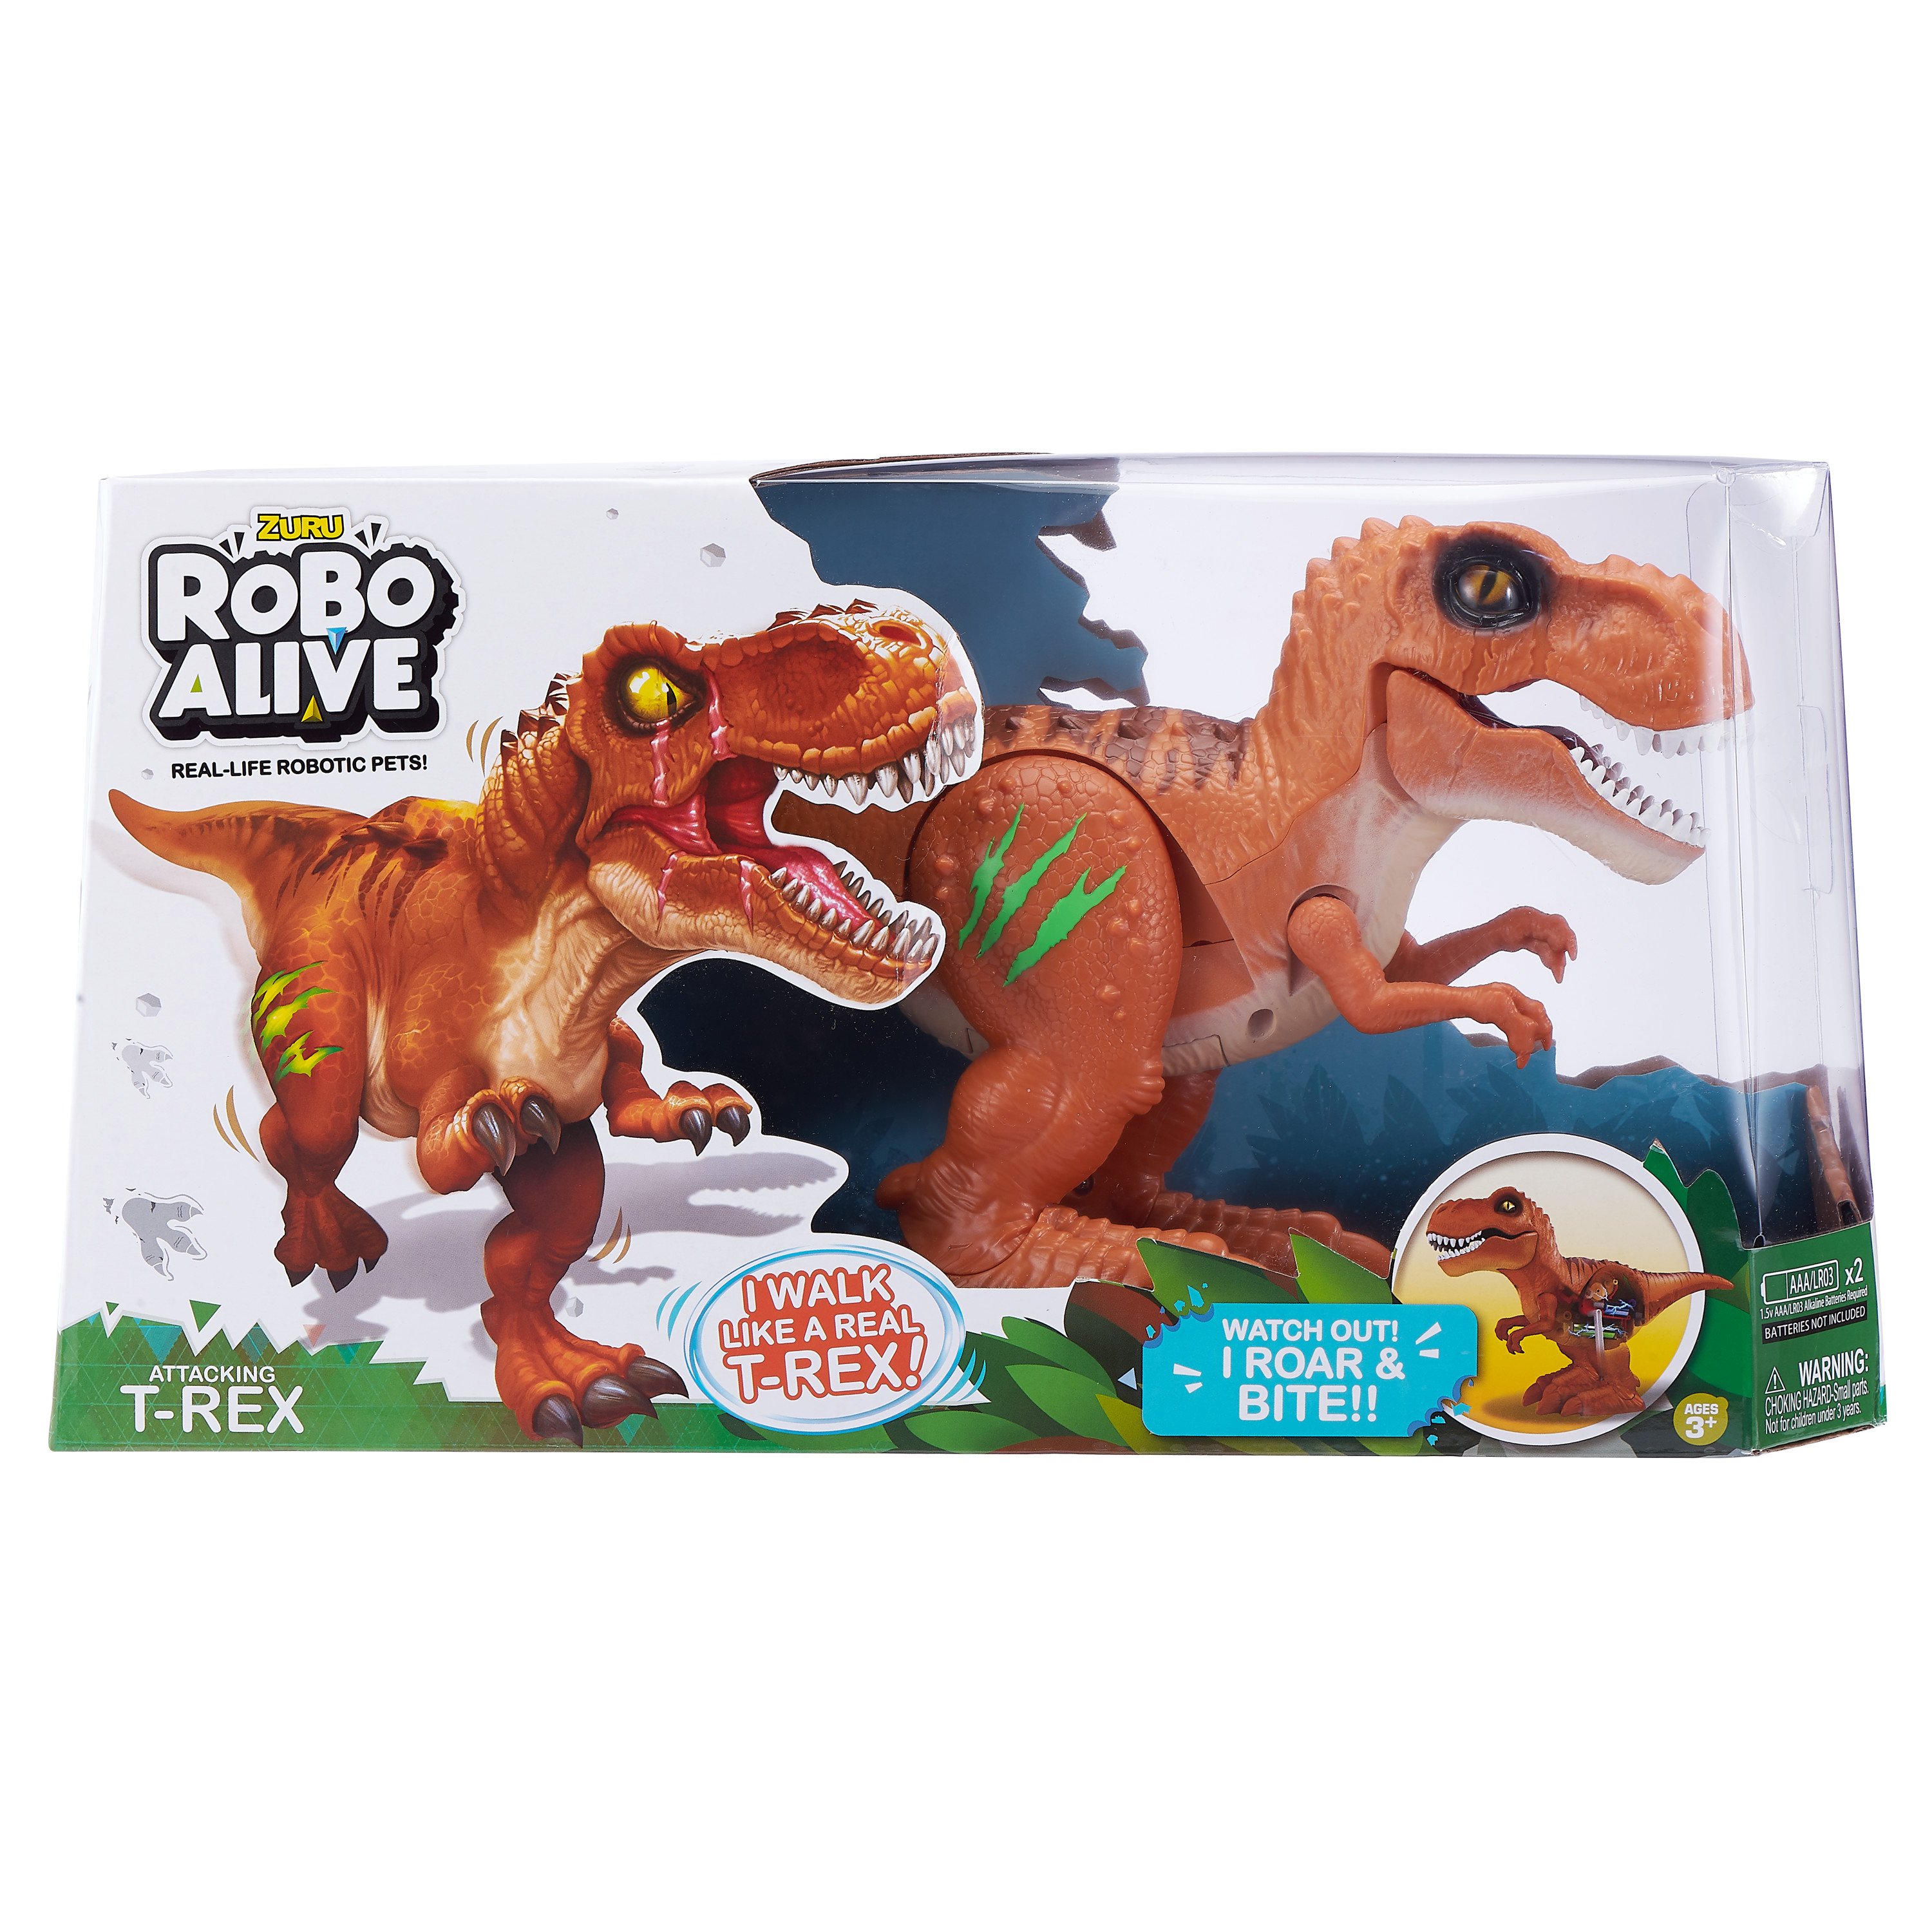 Robo Alive Attacking T-Rex Dinosaur Battery-Powered Robotic Toy by ZURU (Color may vary) - image 3 of 12